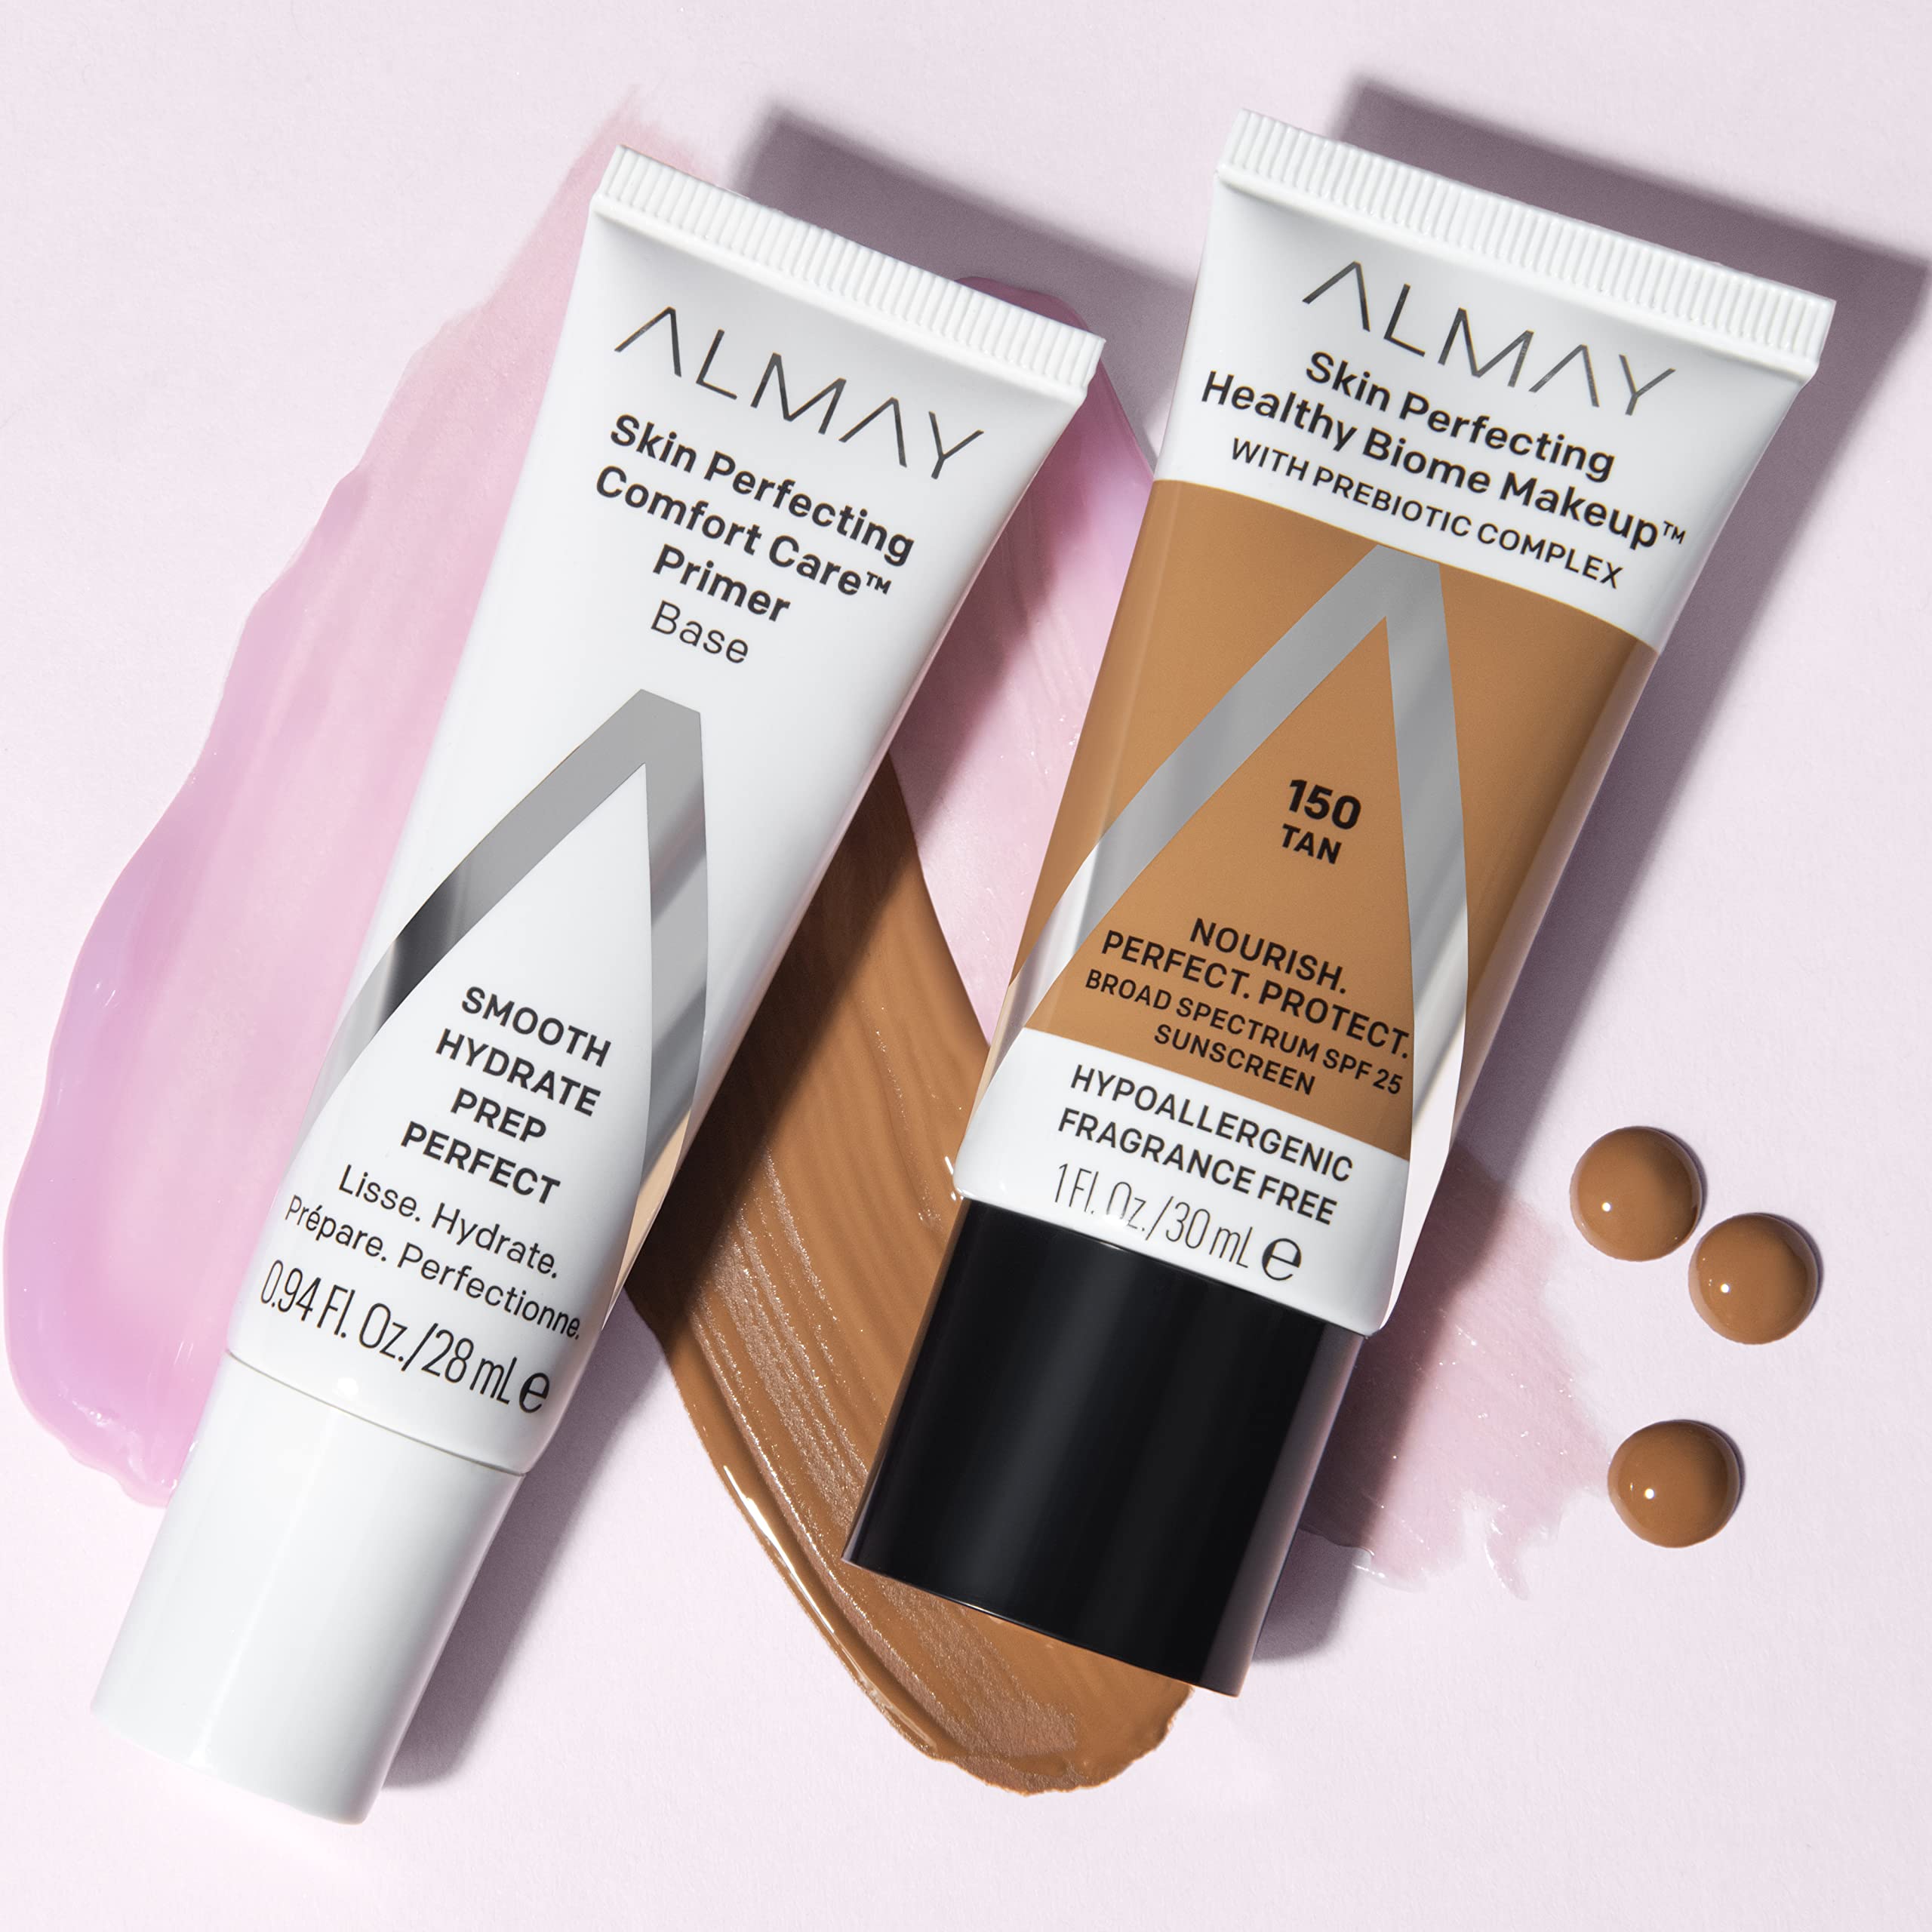 Almay Skin Perfecting Healthy Biome Foundation Makeup with Prebiotic Complex SPF 25, Hypoallergenic, -Fragrance Free, 140 Golden, 1 fl. oz.